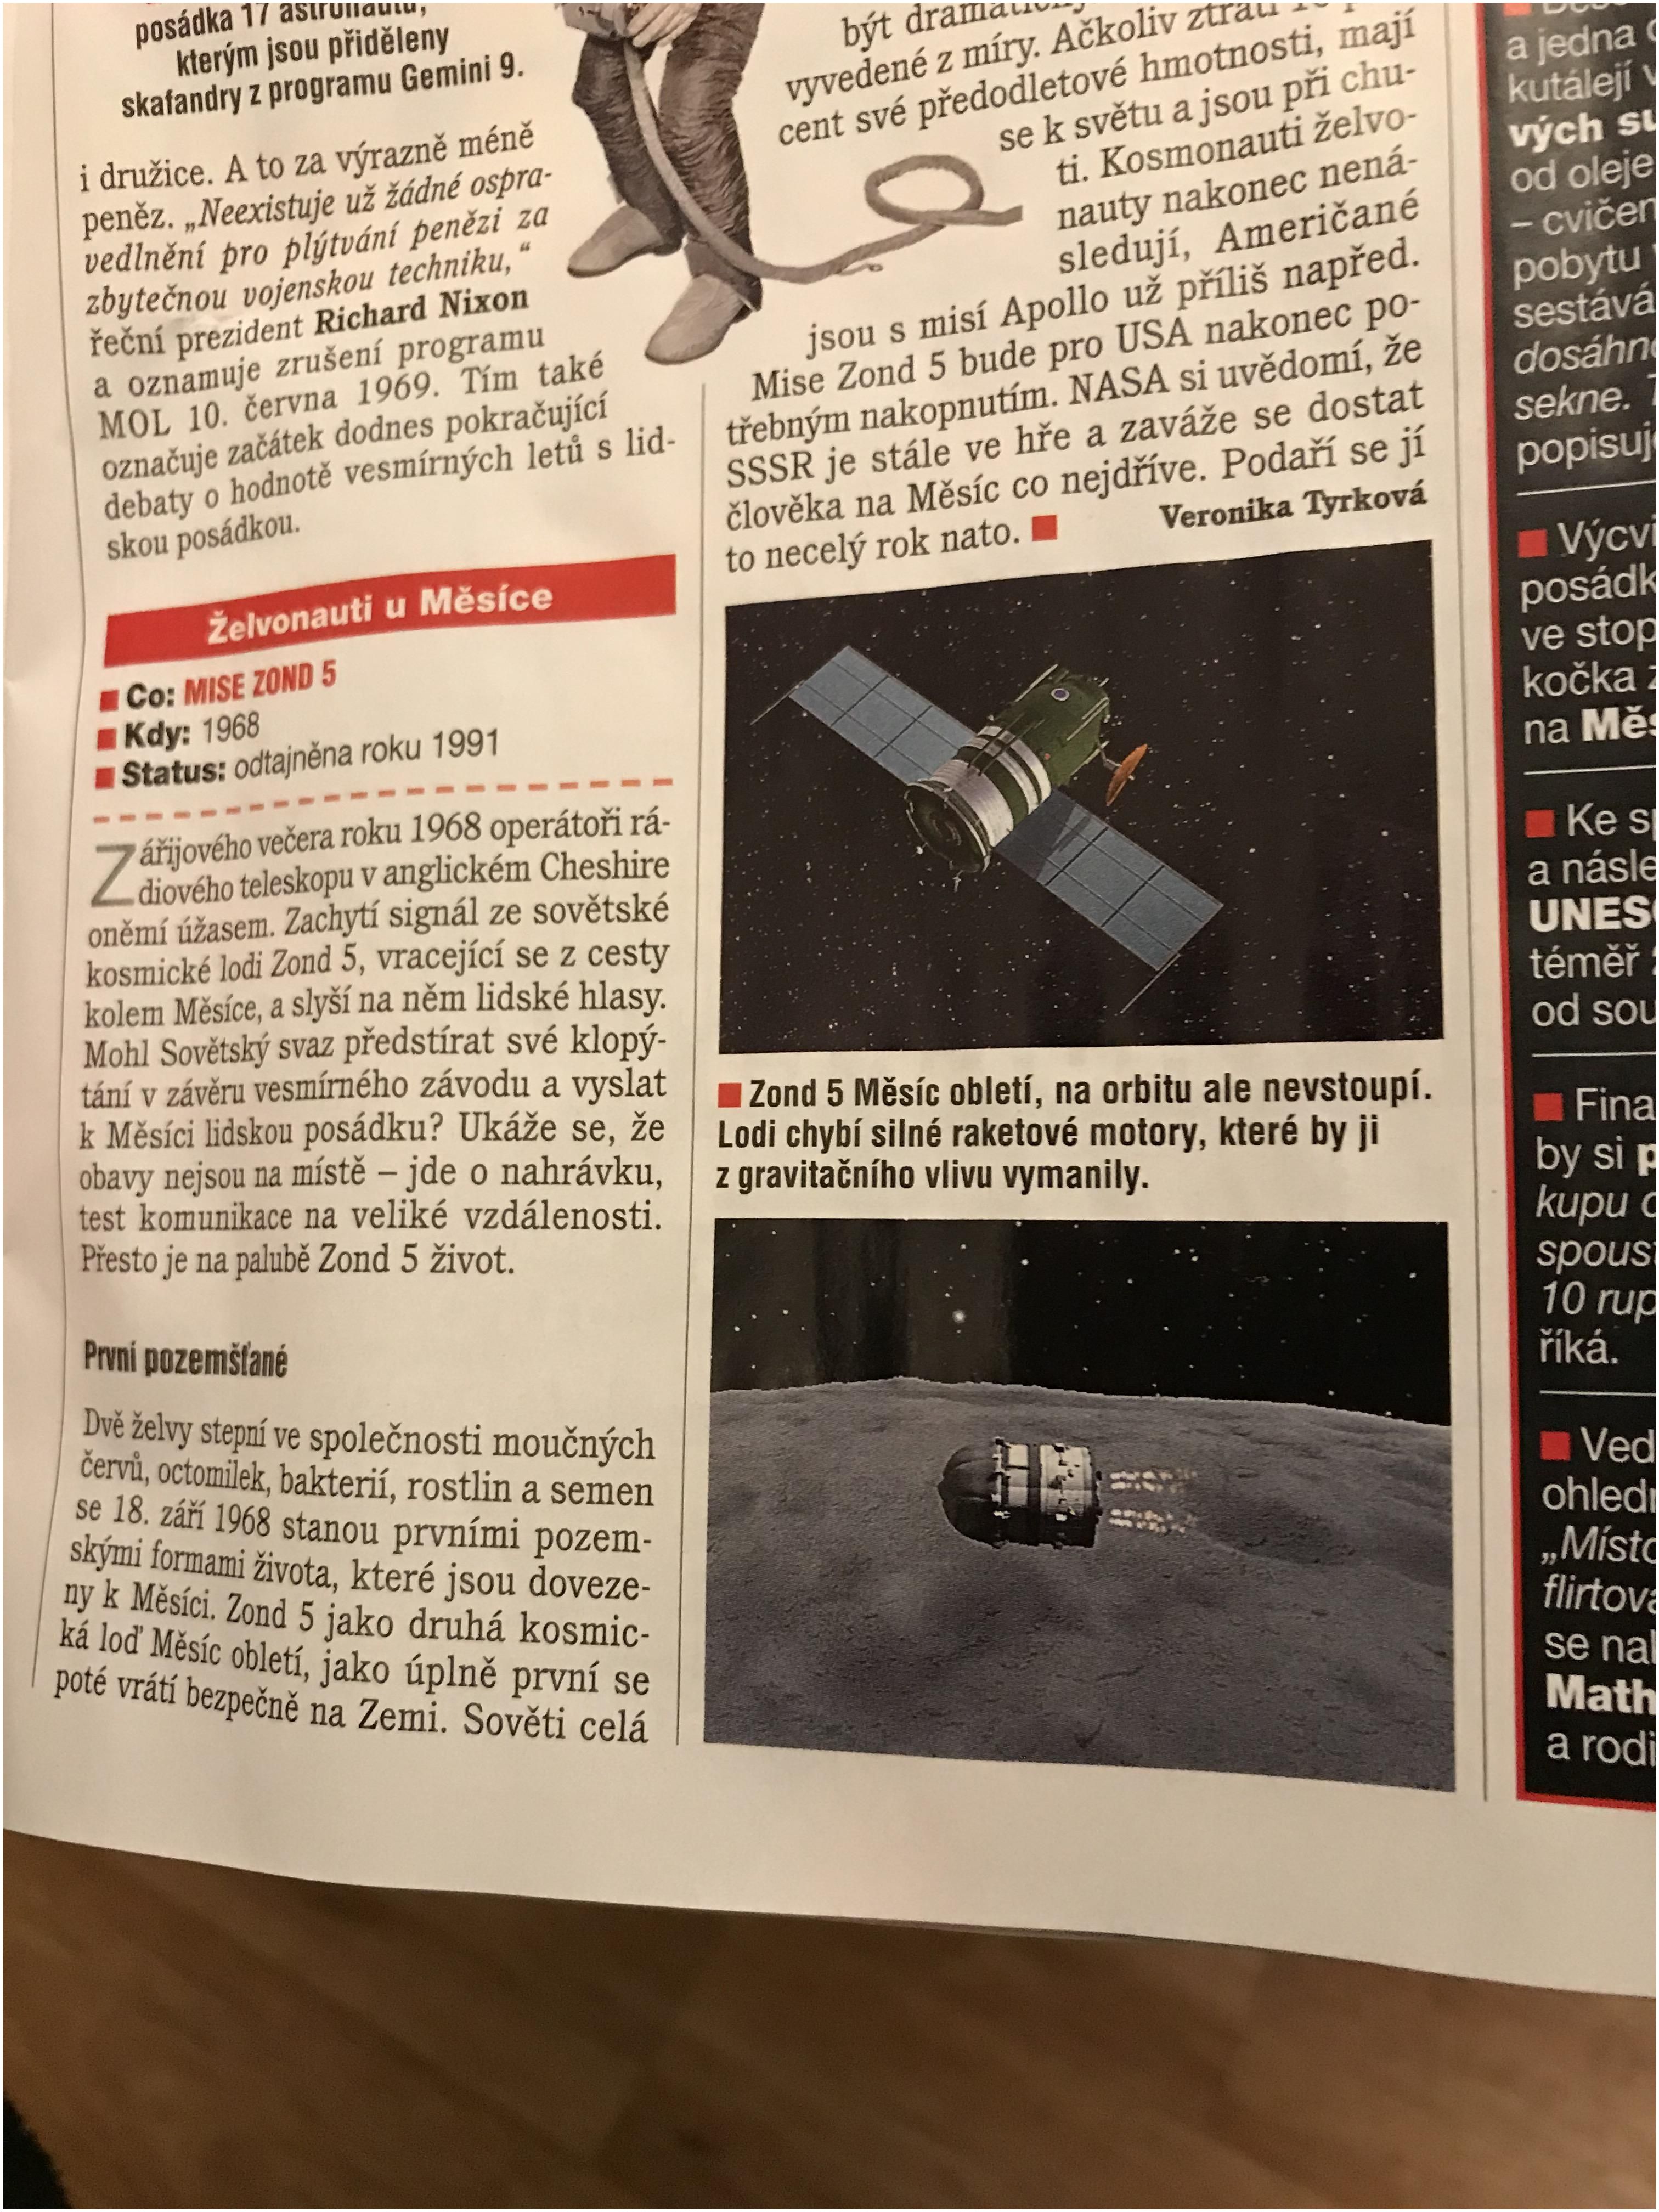 Cheap Magazine Subscriptions Reddit Ce Upon A Time I Was Reading A Magazine and Kerbalspaceprogram